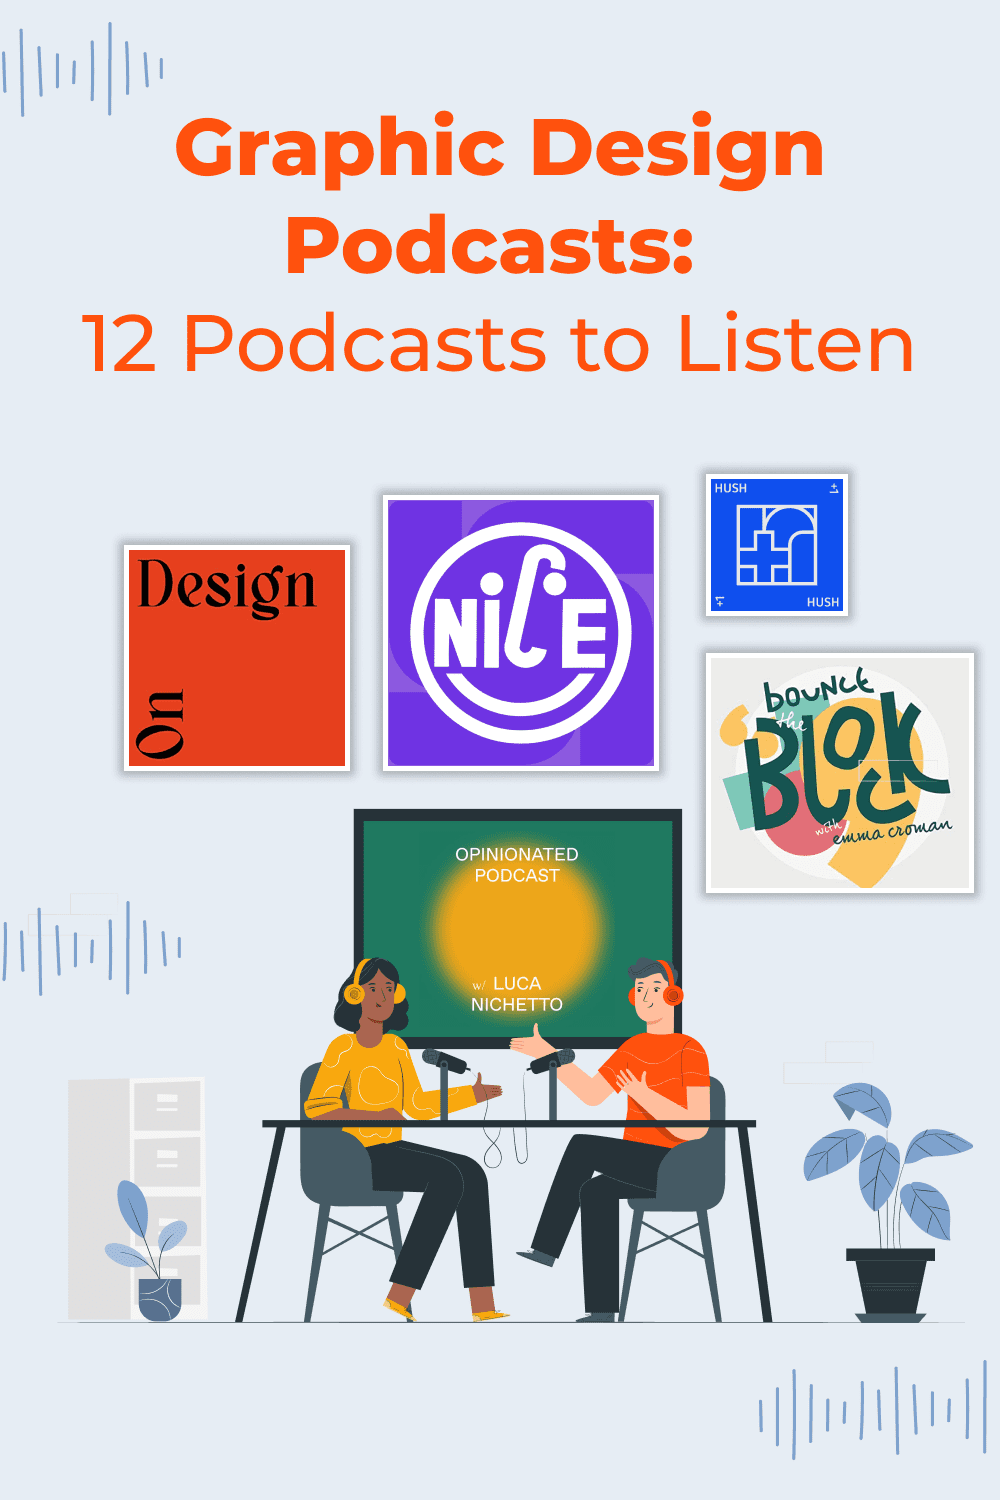 graphic design podcasts 12 podcasts to listen pinterest.